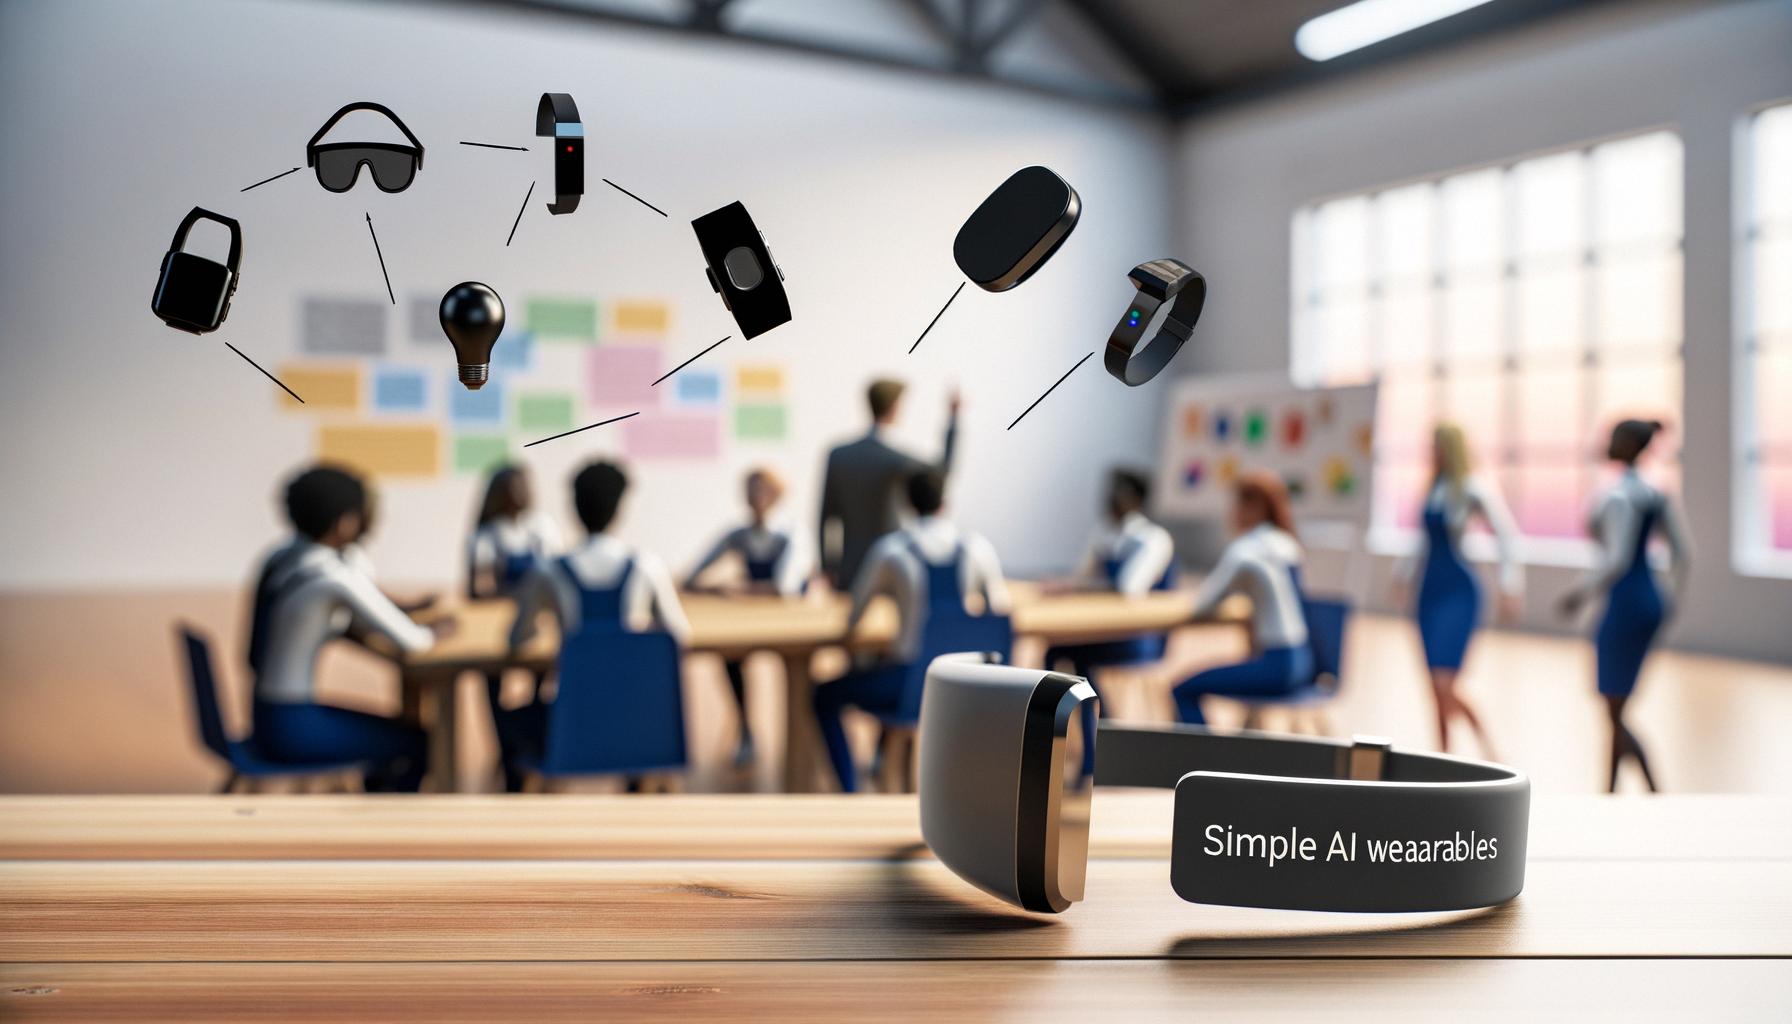 AI wearables improve educational outcomes, surpassing privacy concerns Balanced News